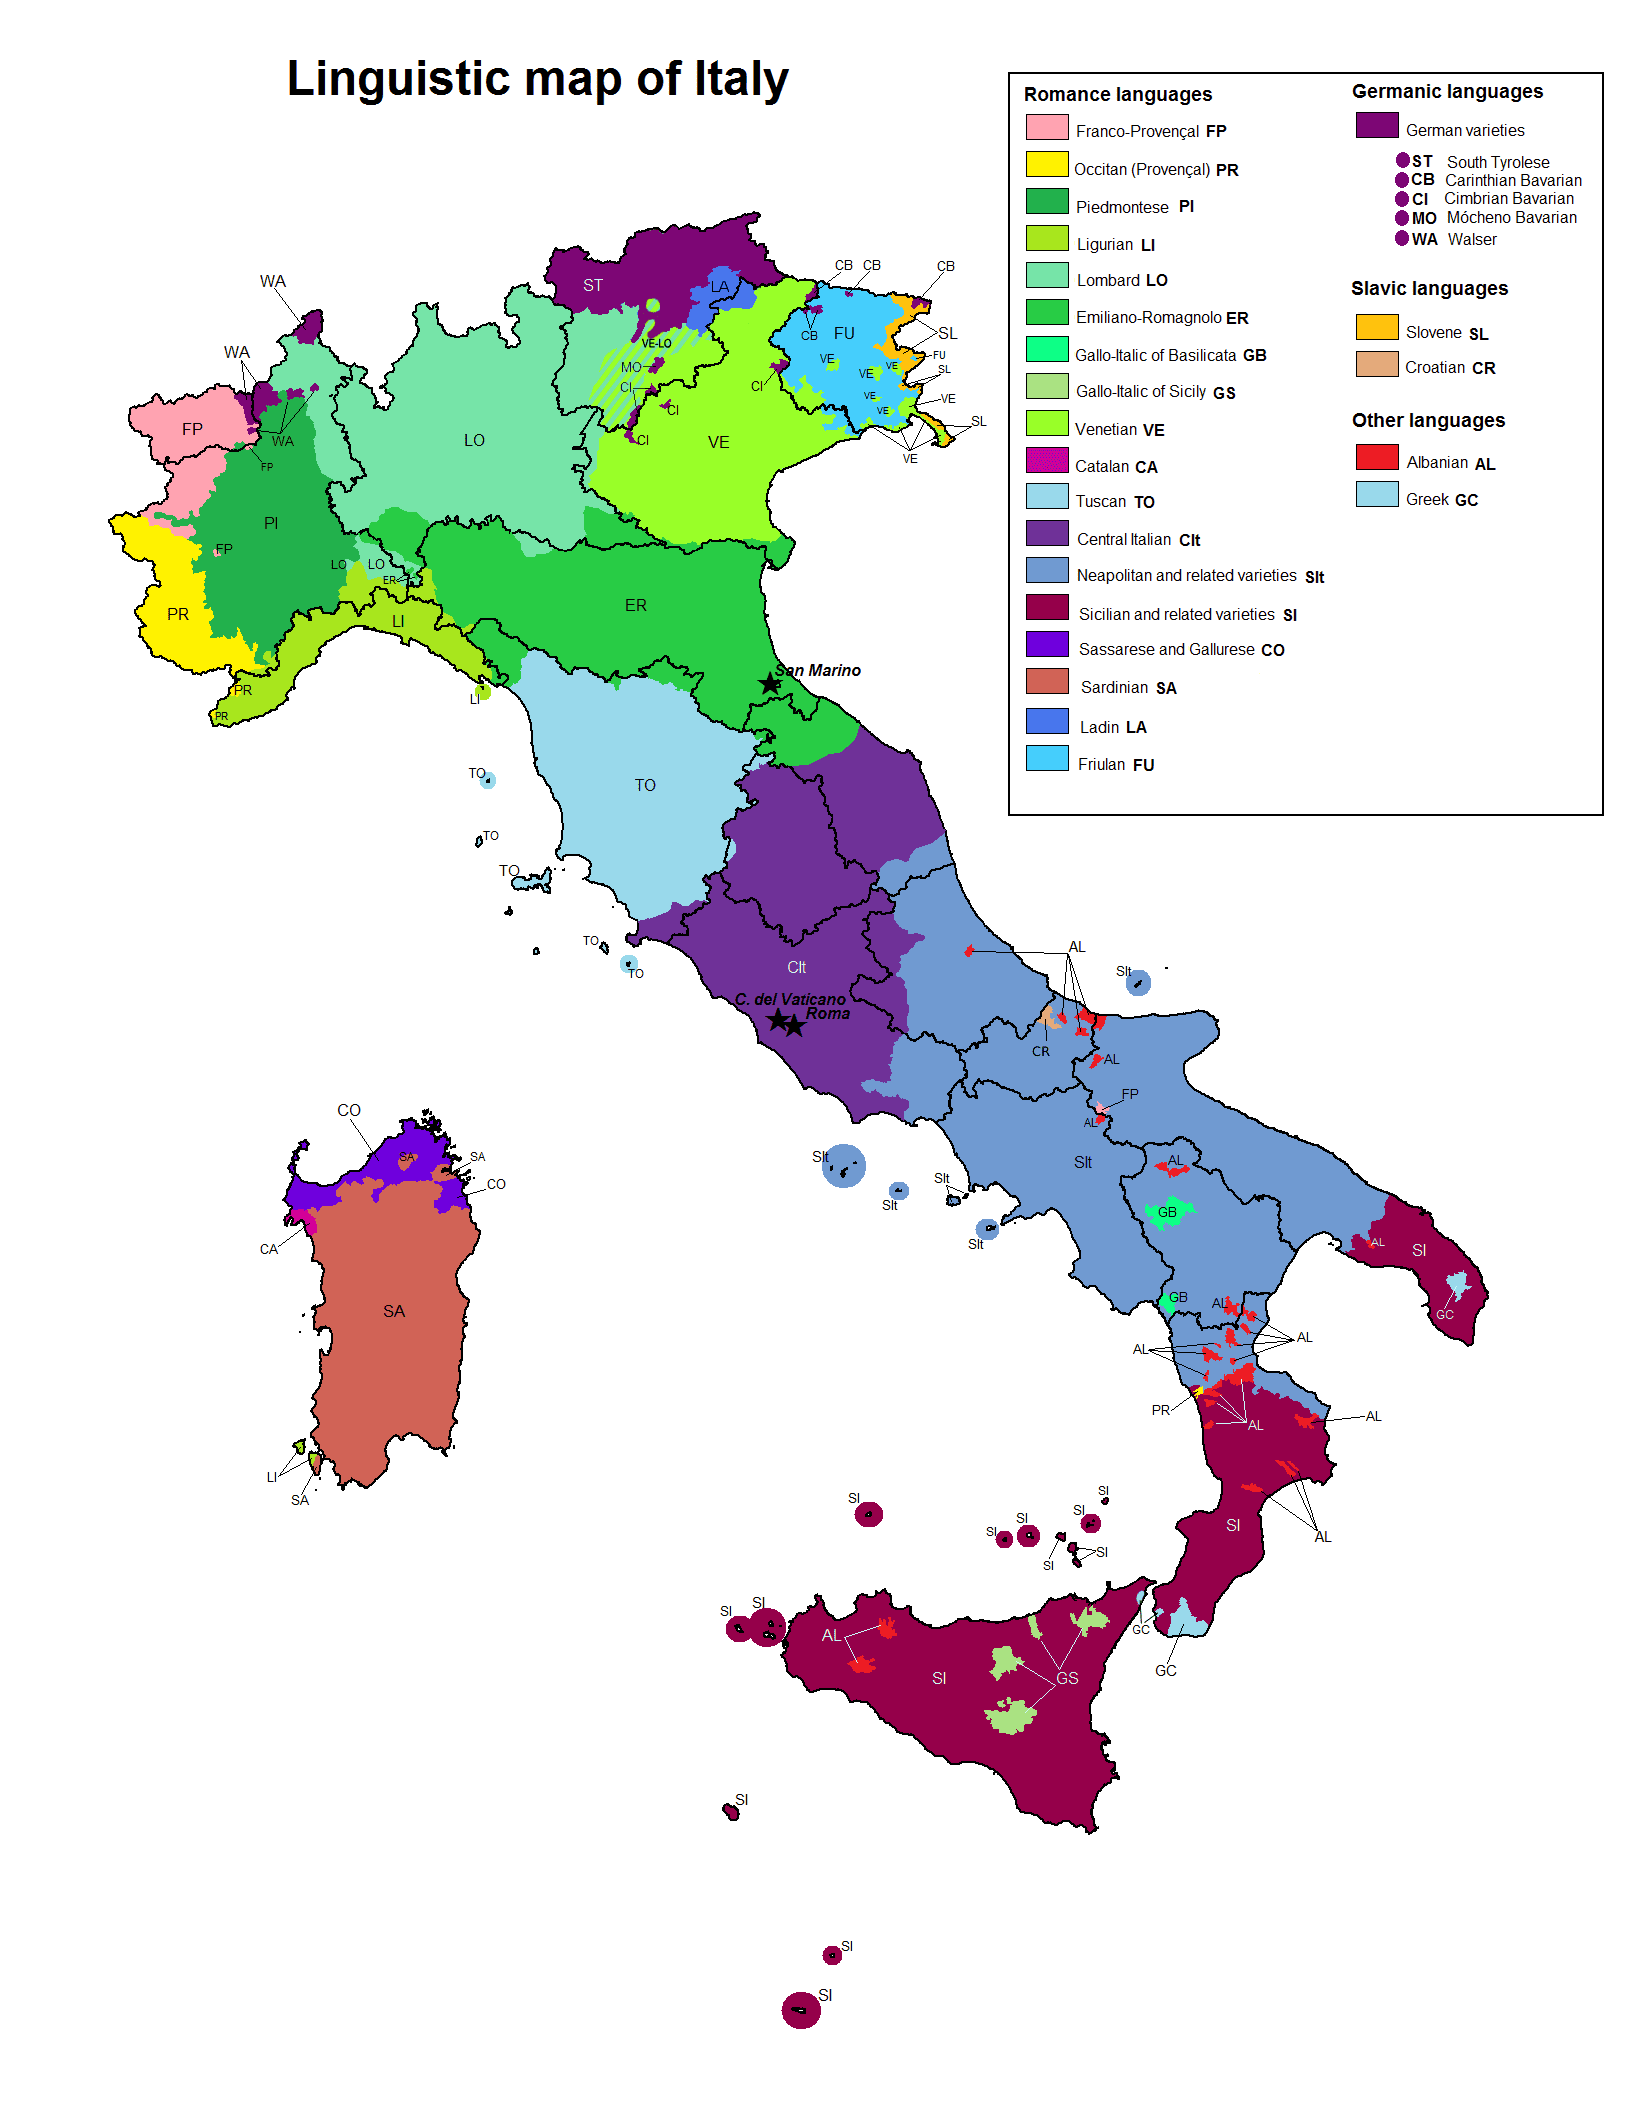 Understanding Italian dialects and the Standard Language
